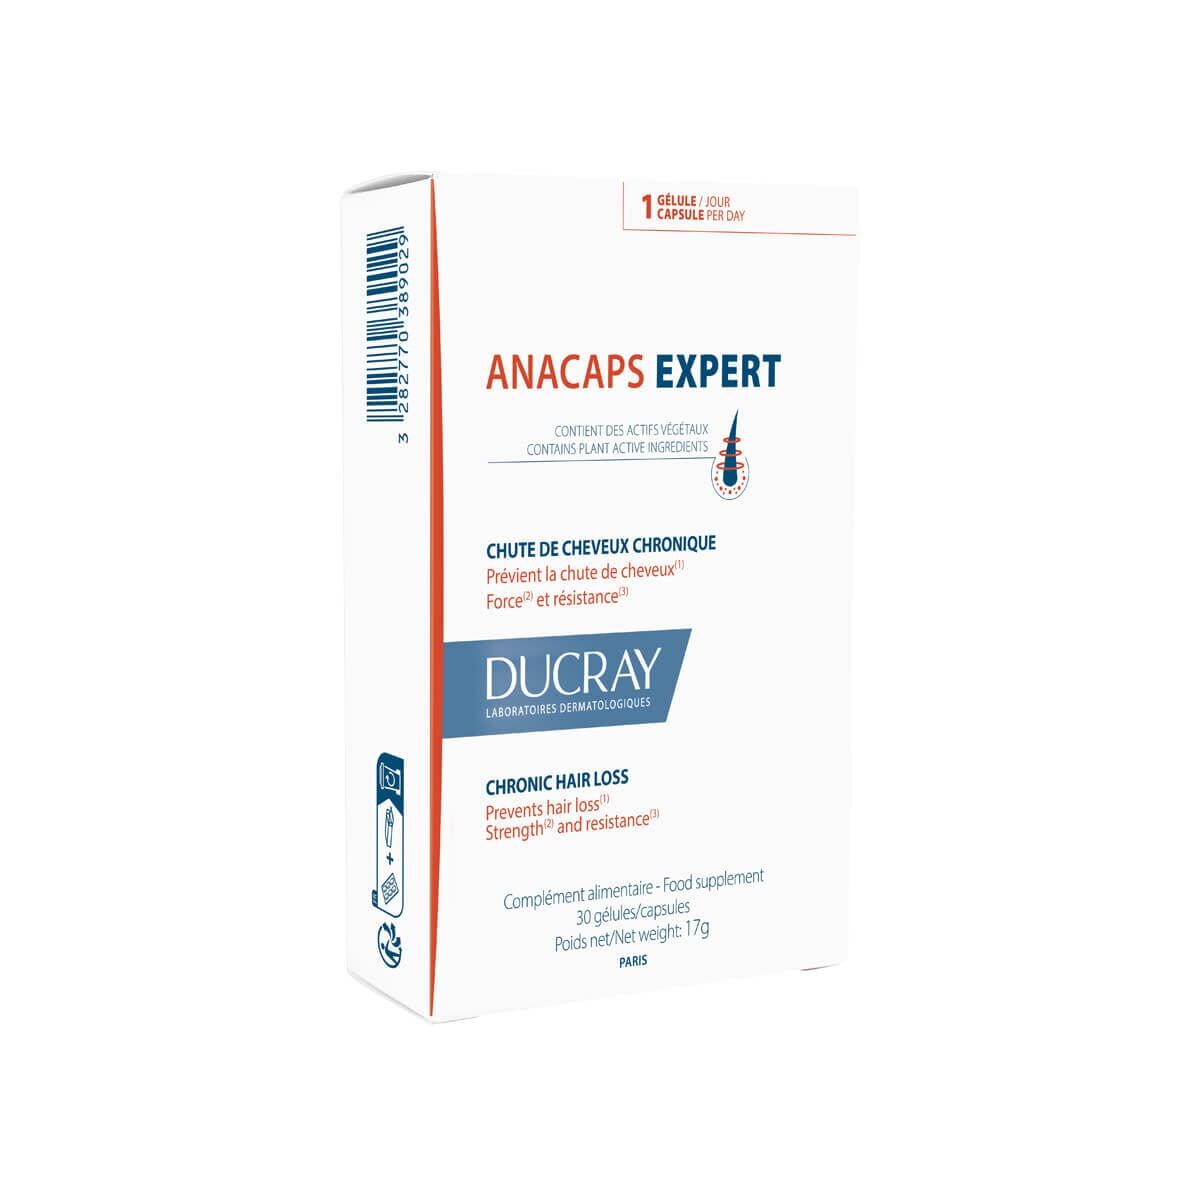 Hair Loss Food Supplement Ducray Anacaps Expert Capsules x 30 | Ducray | Aylal Beauty